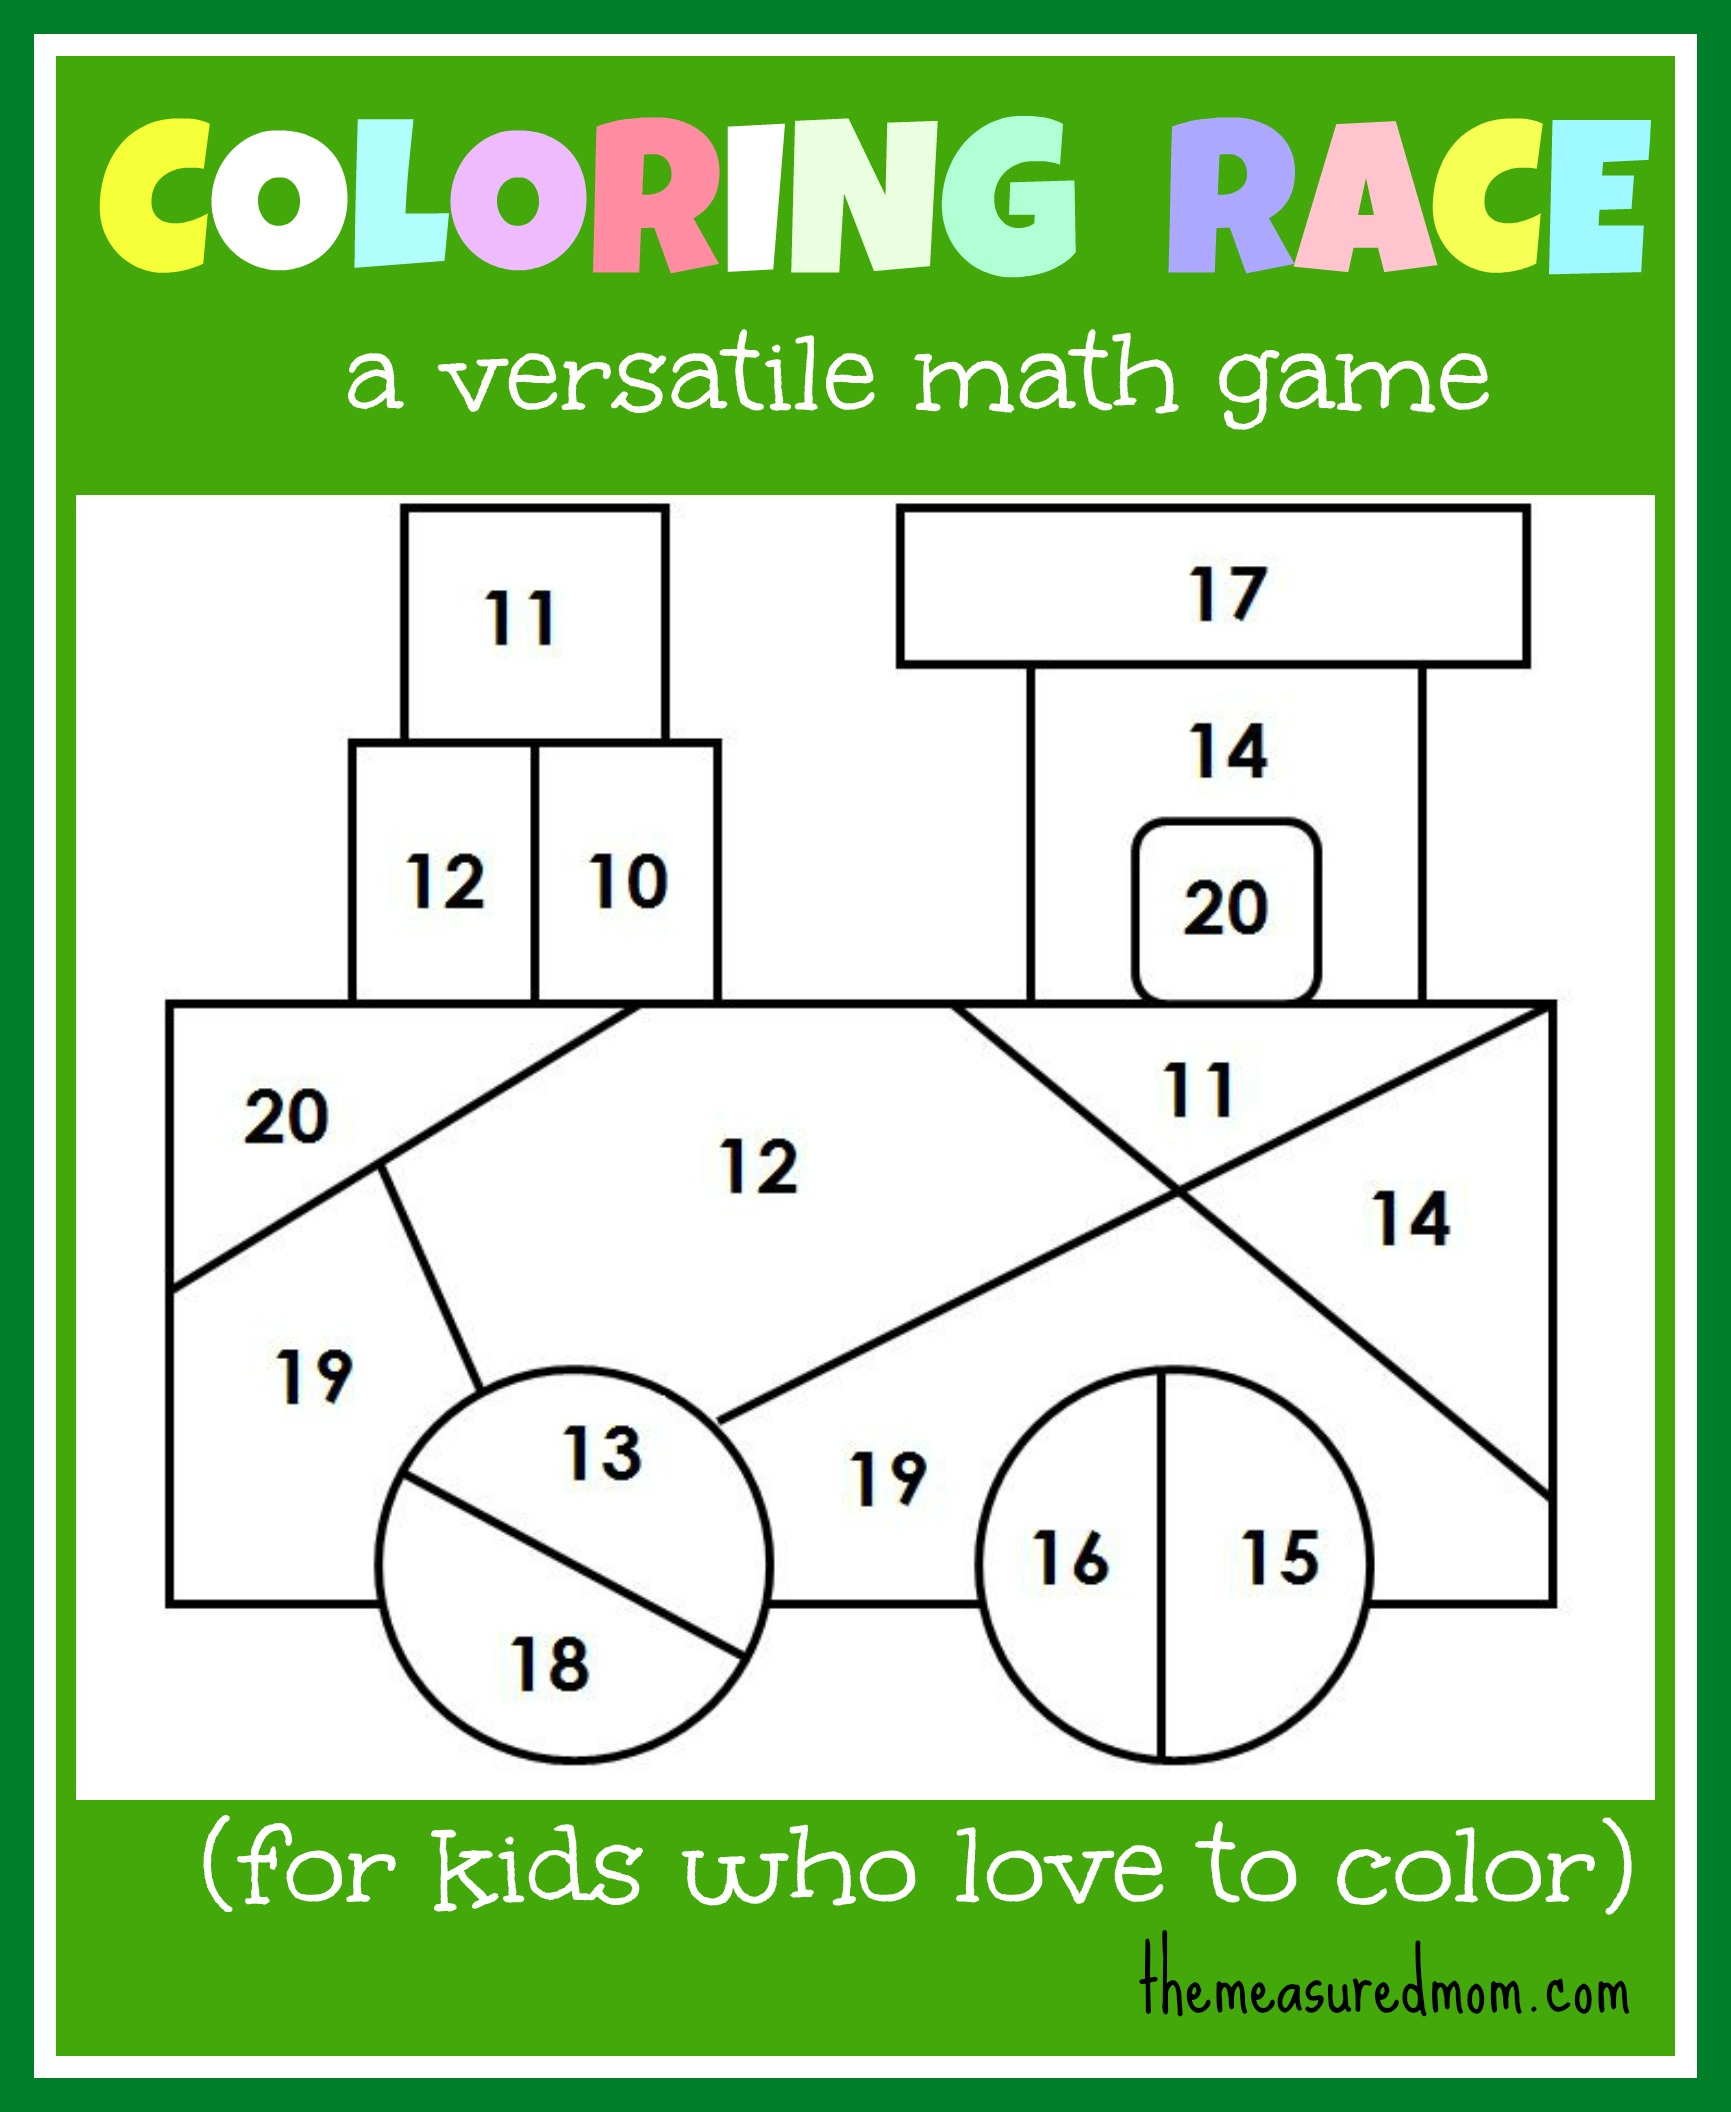 Math game for kids coloring race bines math and coloring